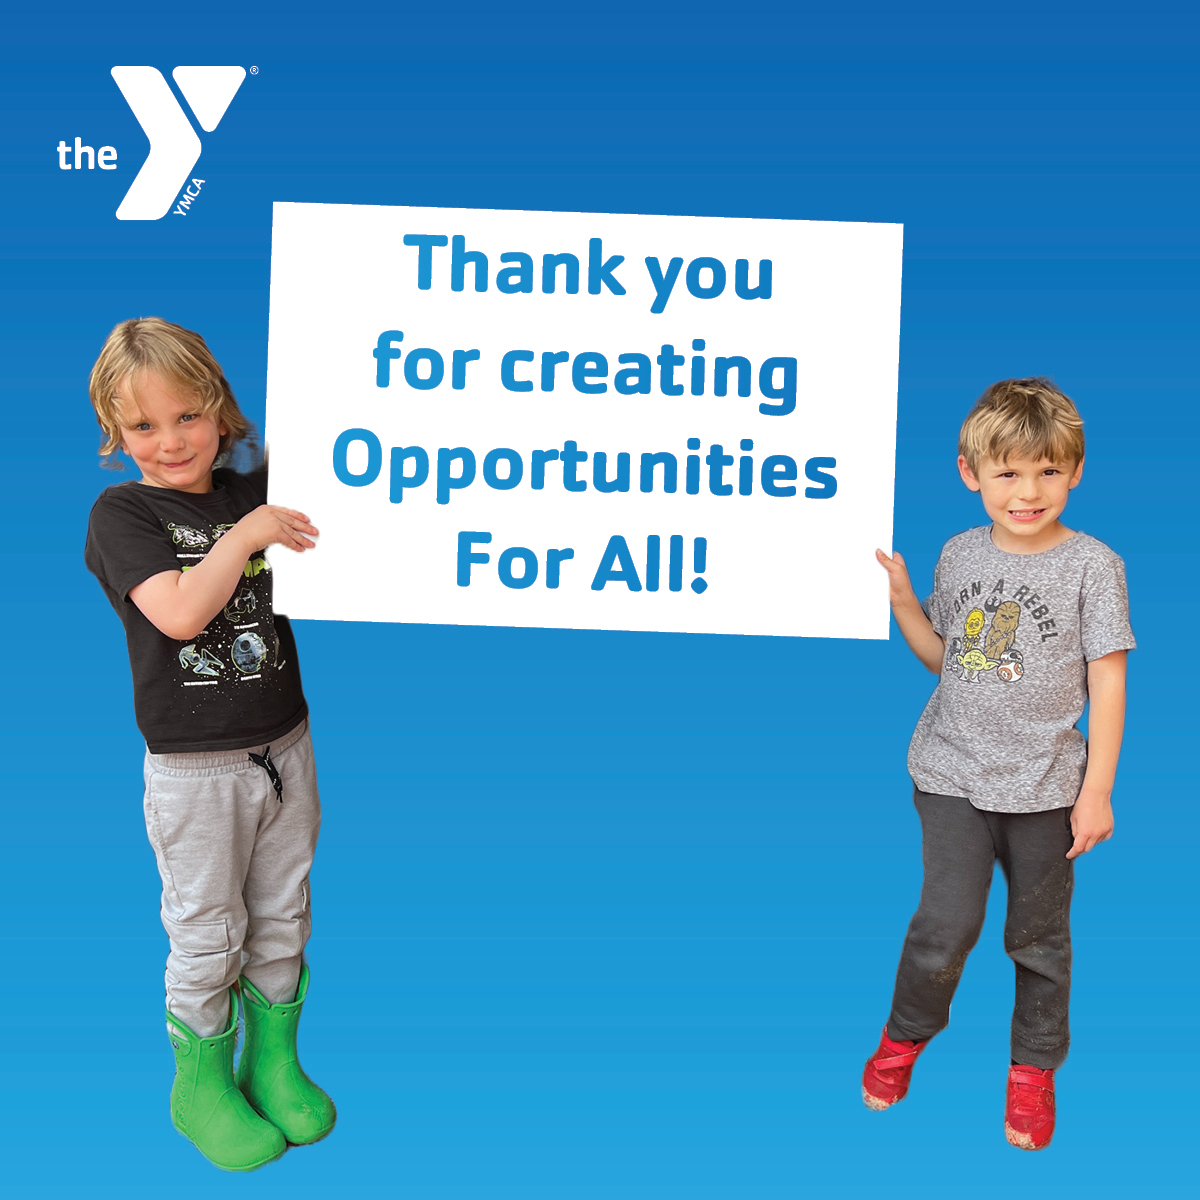 two preschool boys hold a sign thanking members for donating the the ymca opportunities for all fundraising campaign